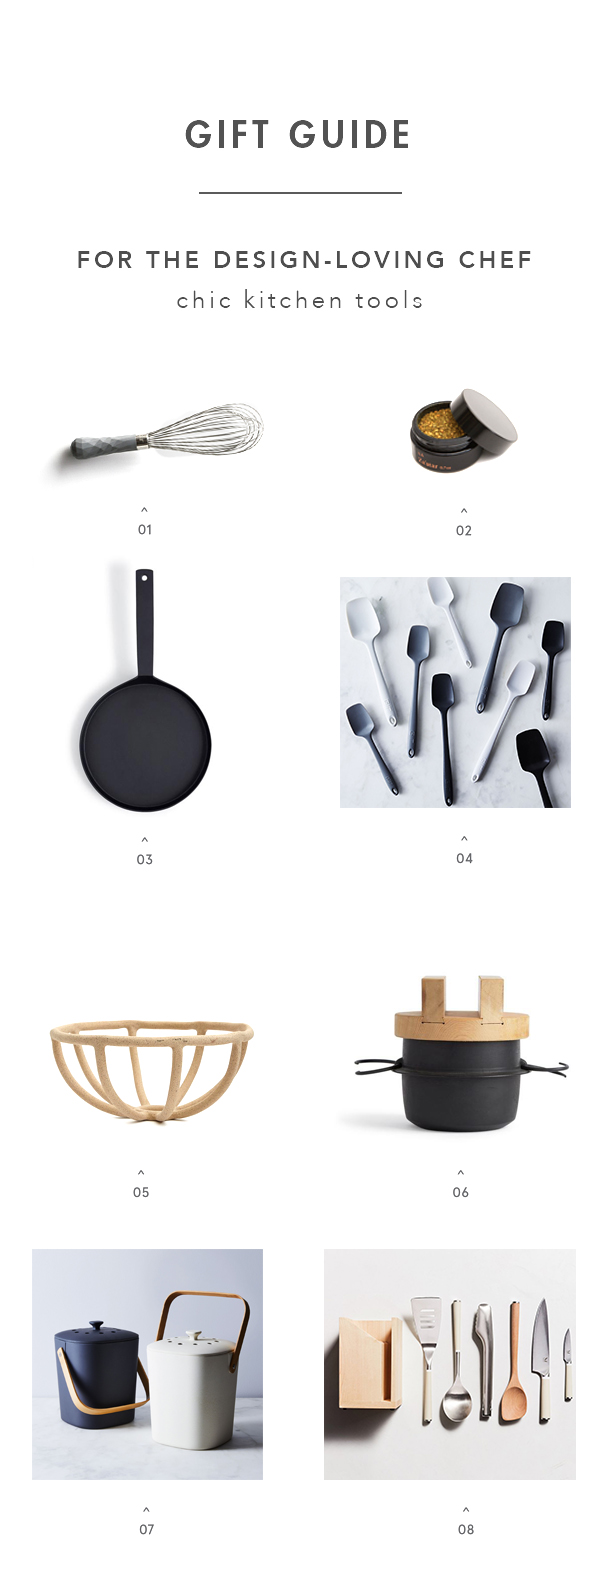 Gift Guide for the Design-Loving Cook